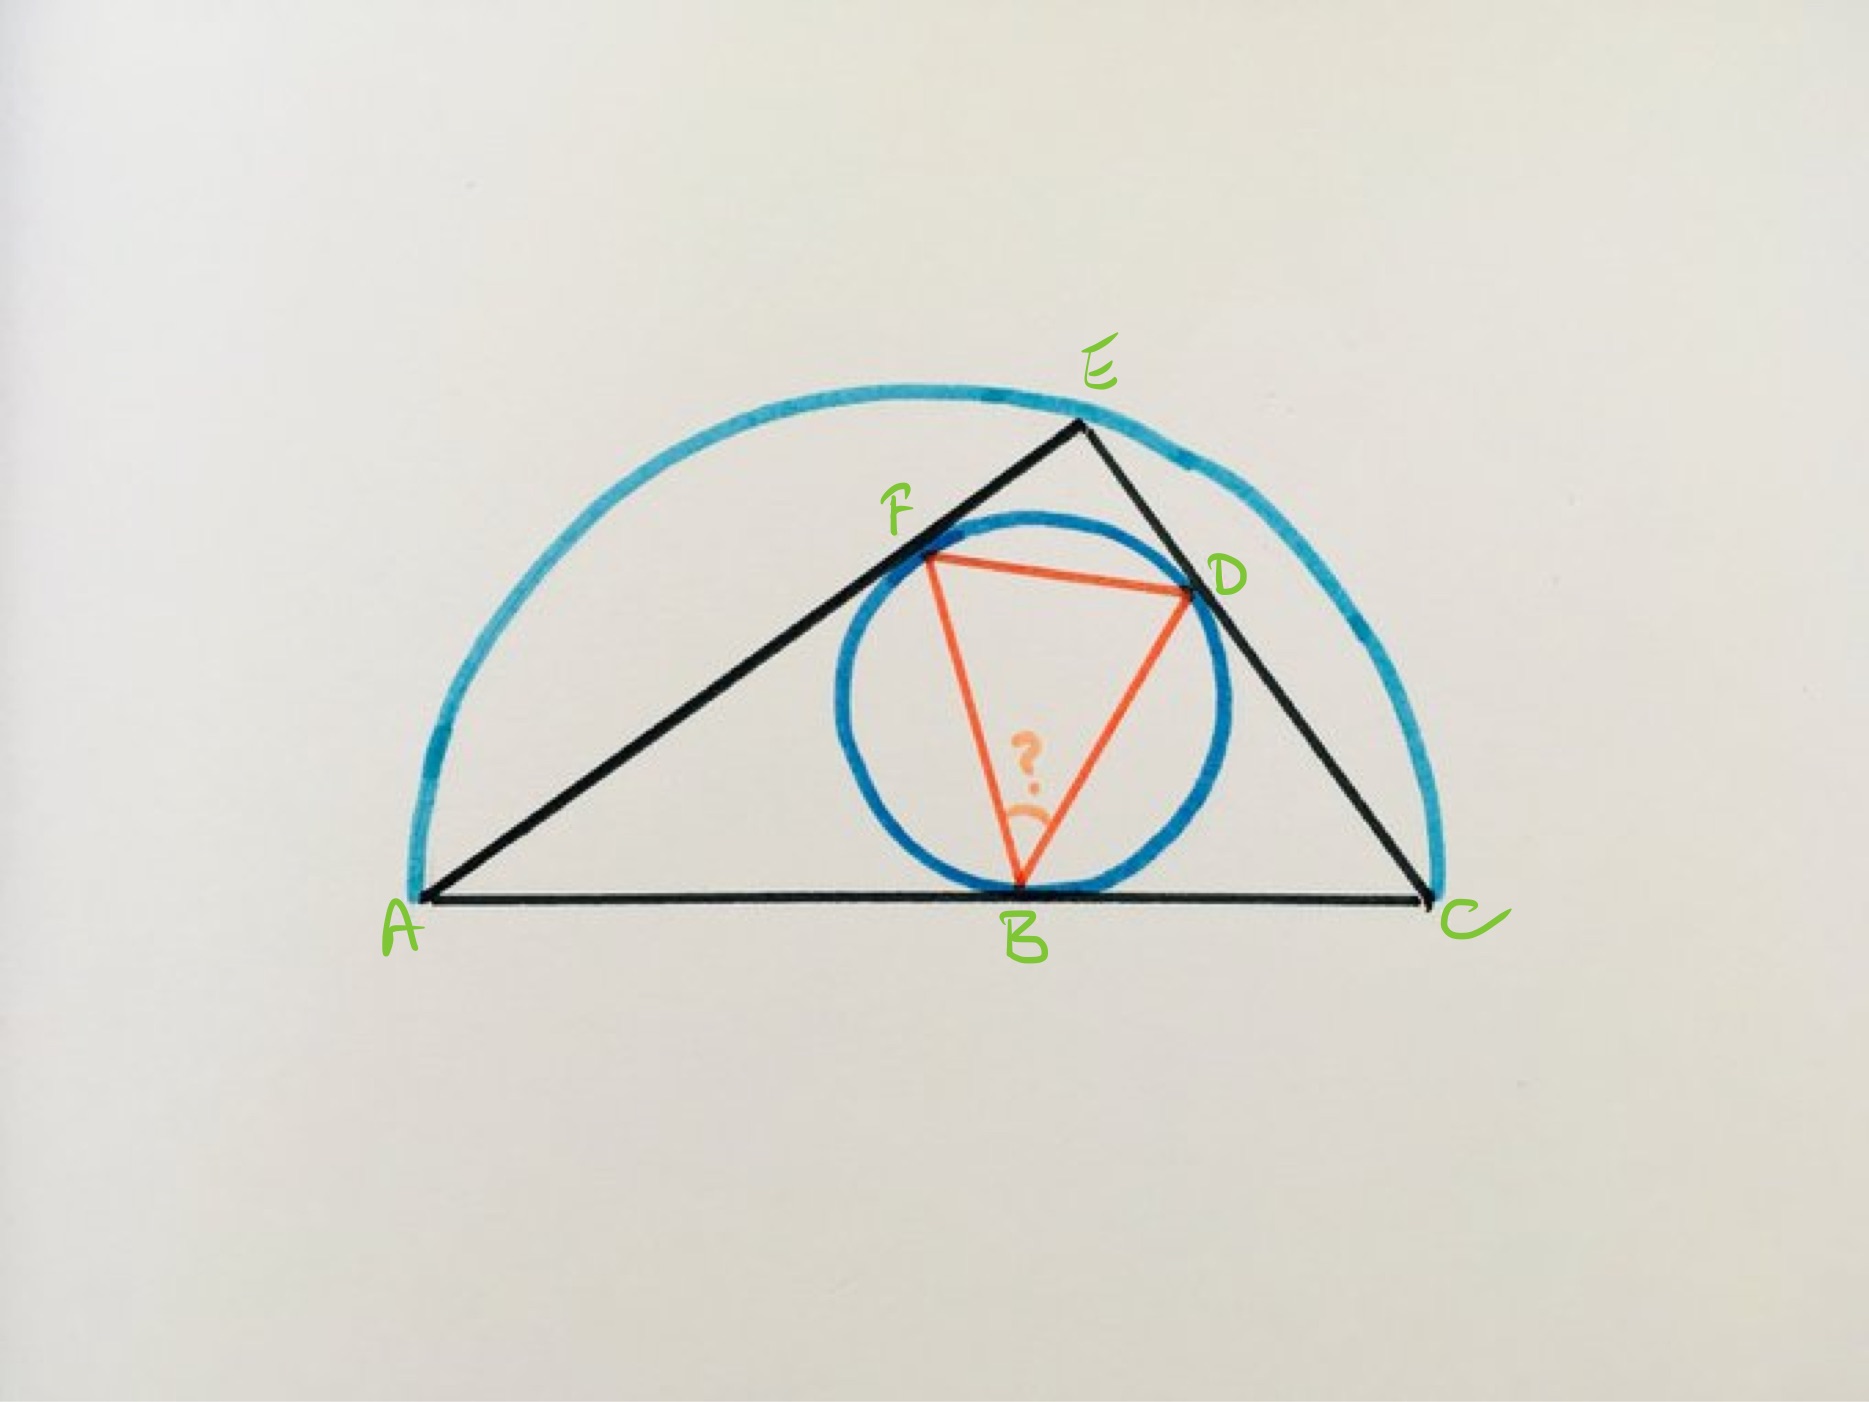 Triangle in circle in triangle in semi-circle labelled